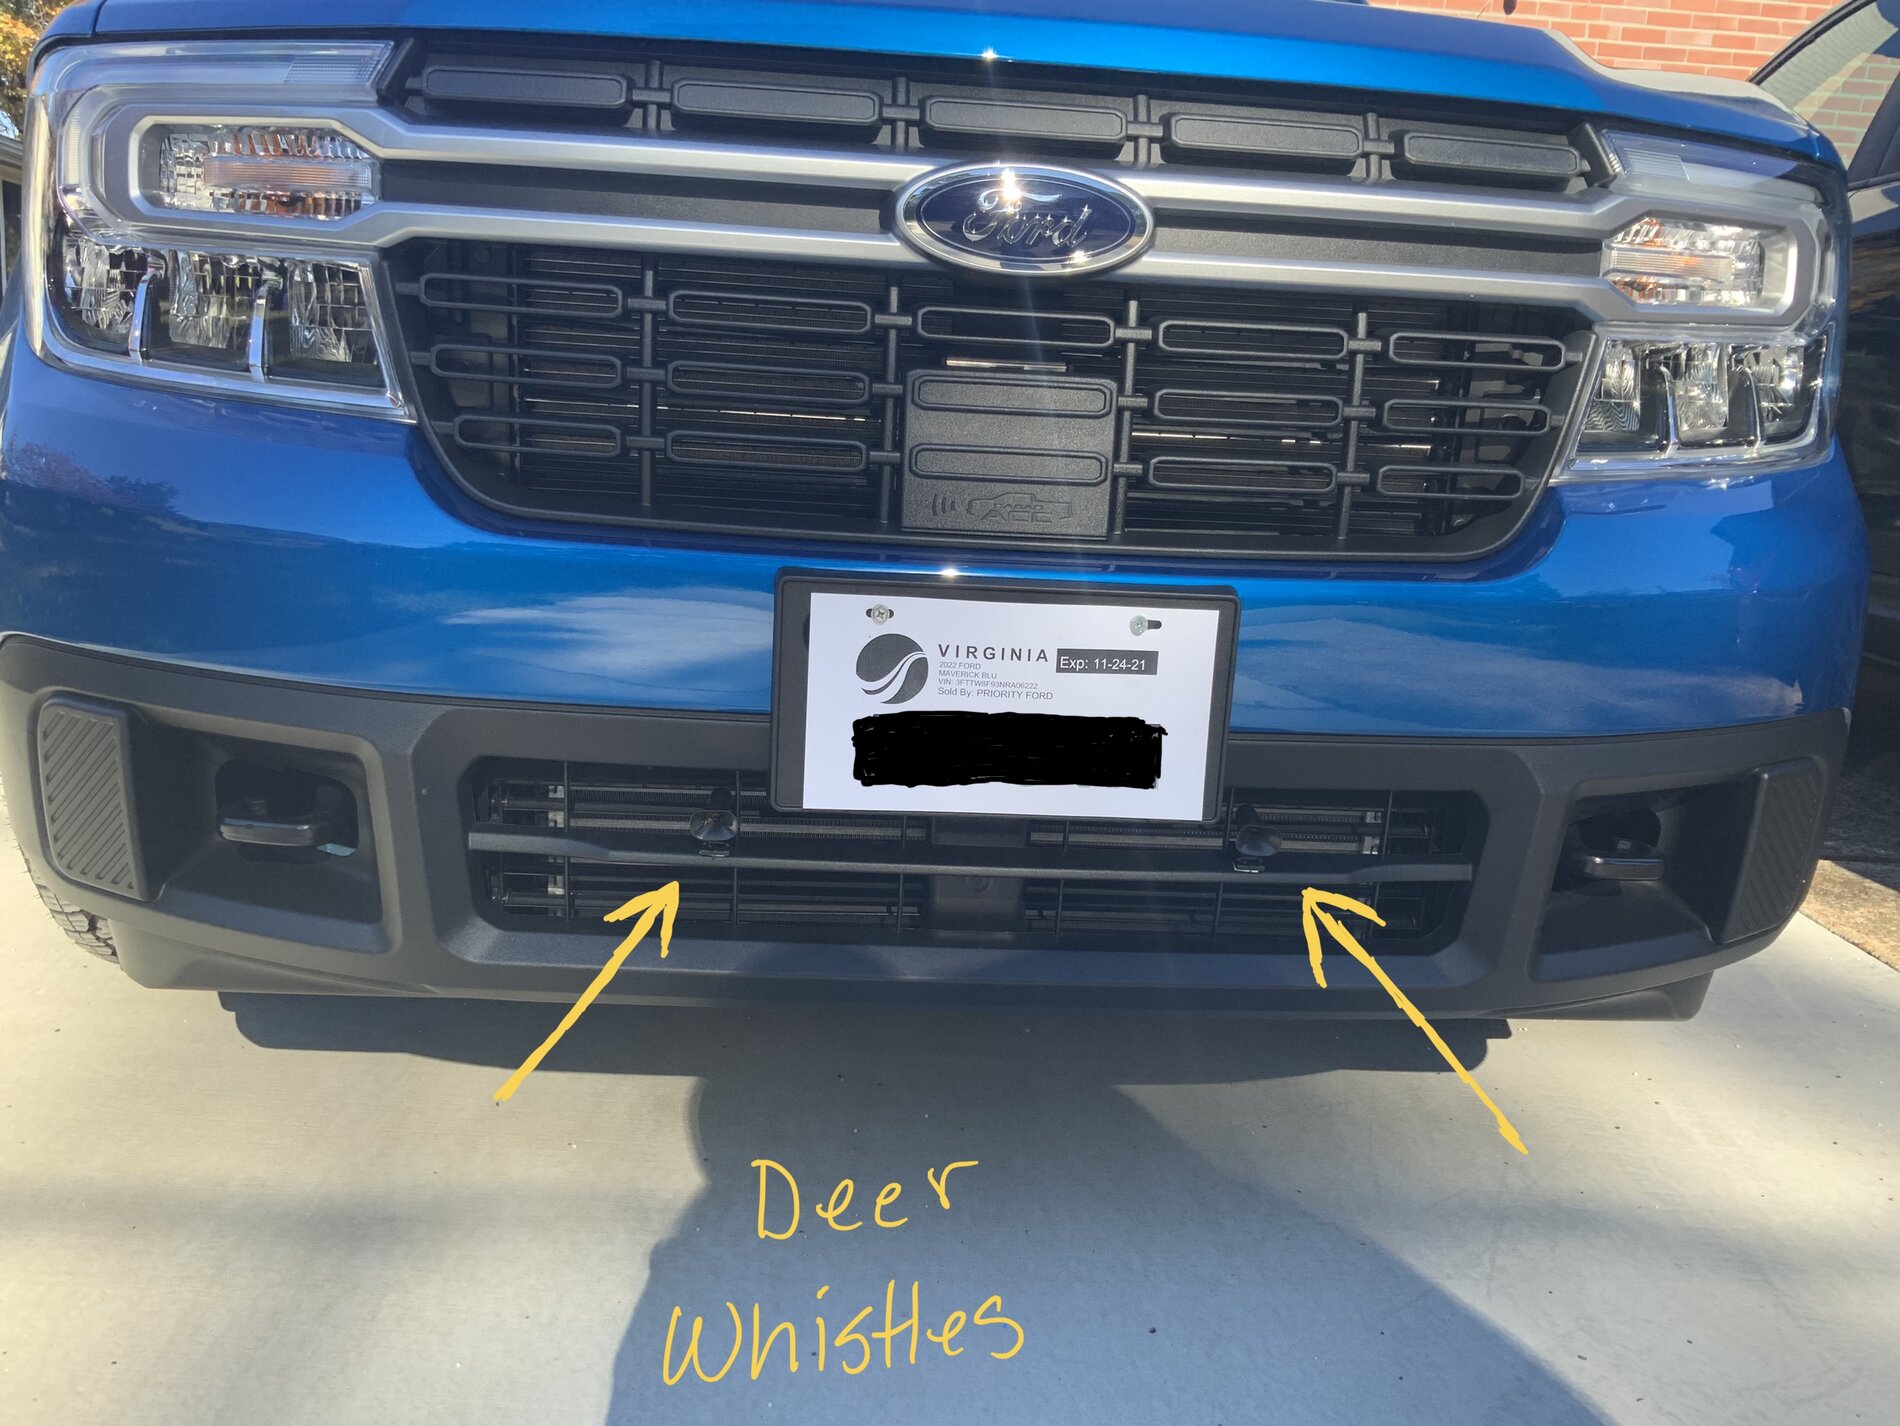 Must Have First Upgrade - Deer Whistles!  MaverickTruckClub - 2022+ Ford  Maverick Pickup Forum, News, Owners, Discussions